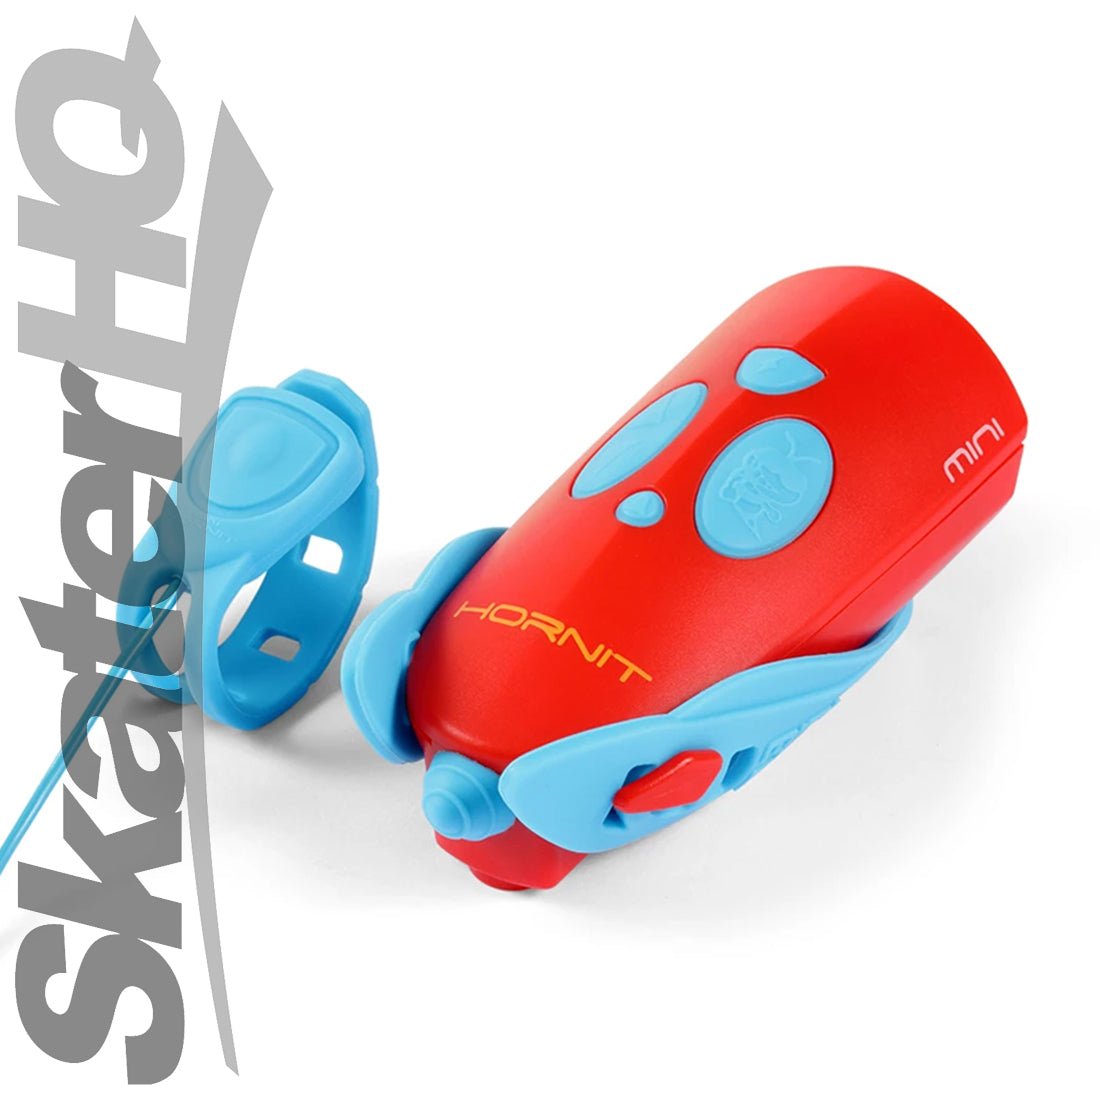 Hornit Mini Noise Maker &amp; Light - Red/Blue Scooter Accessories